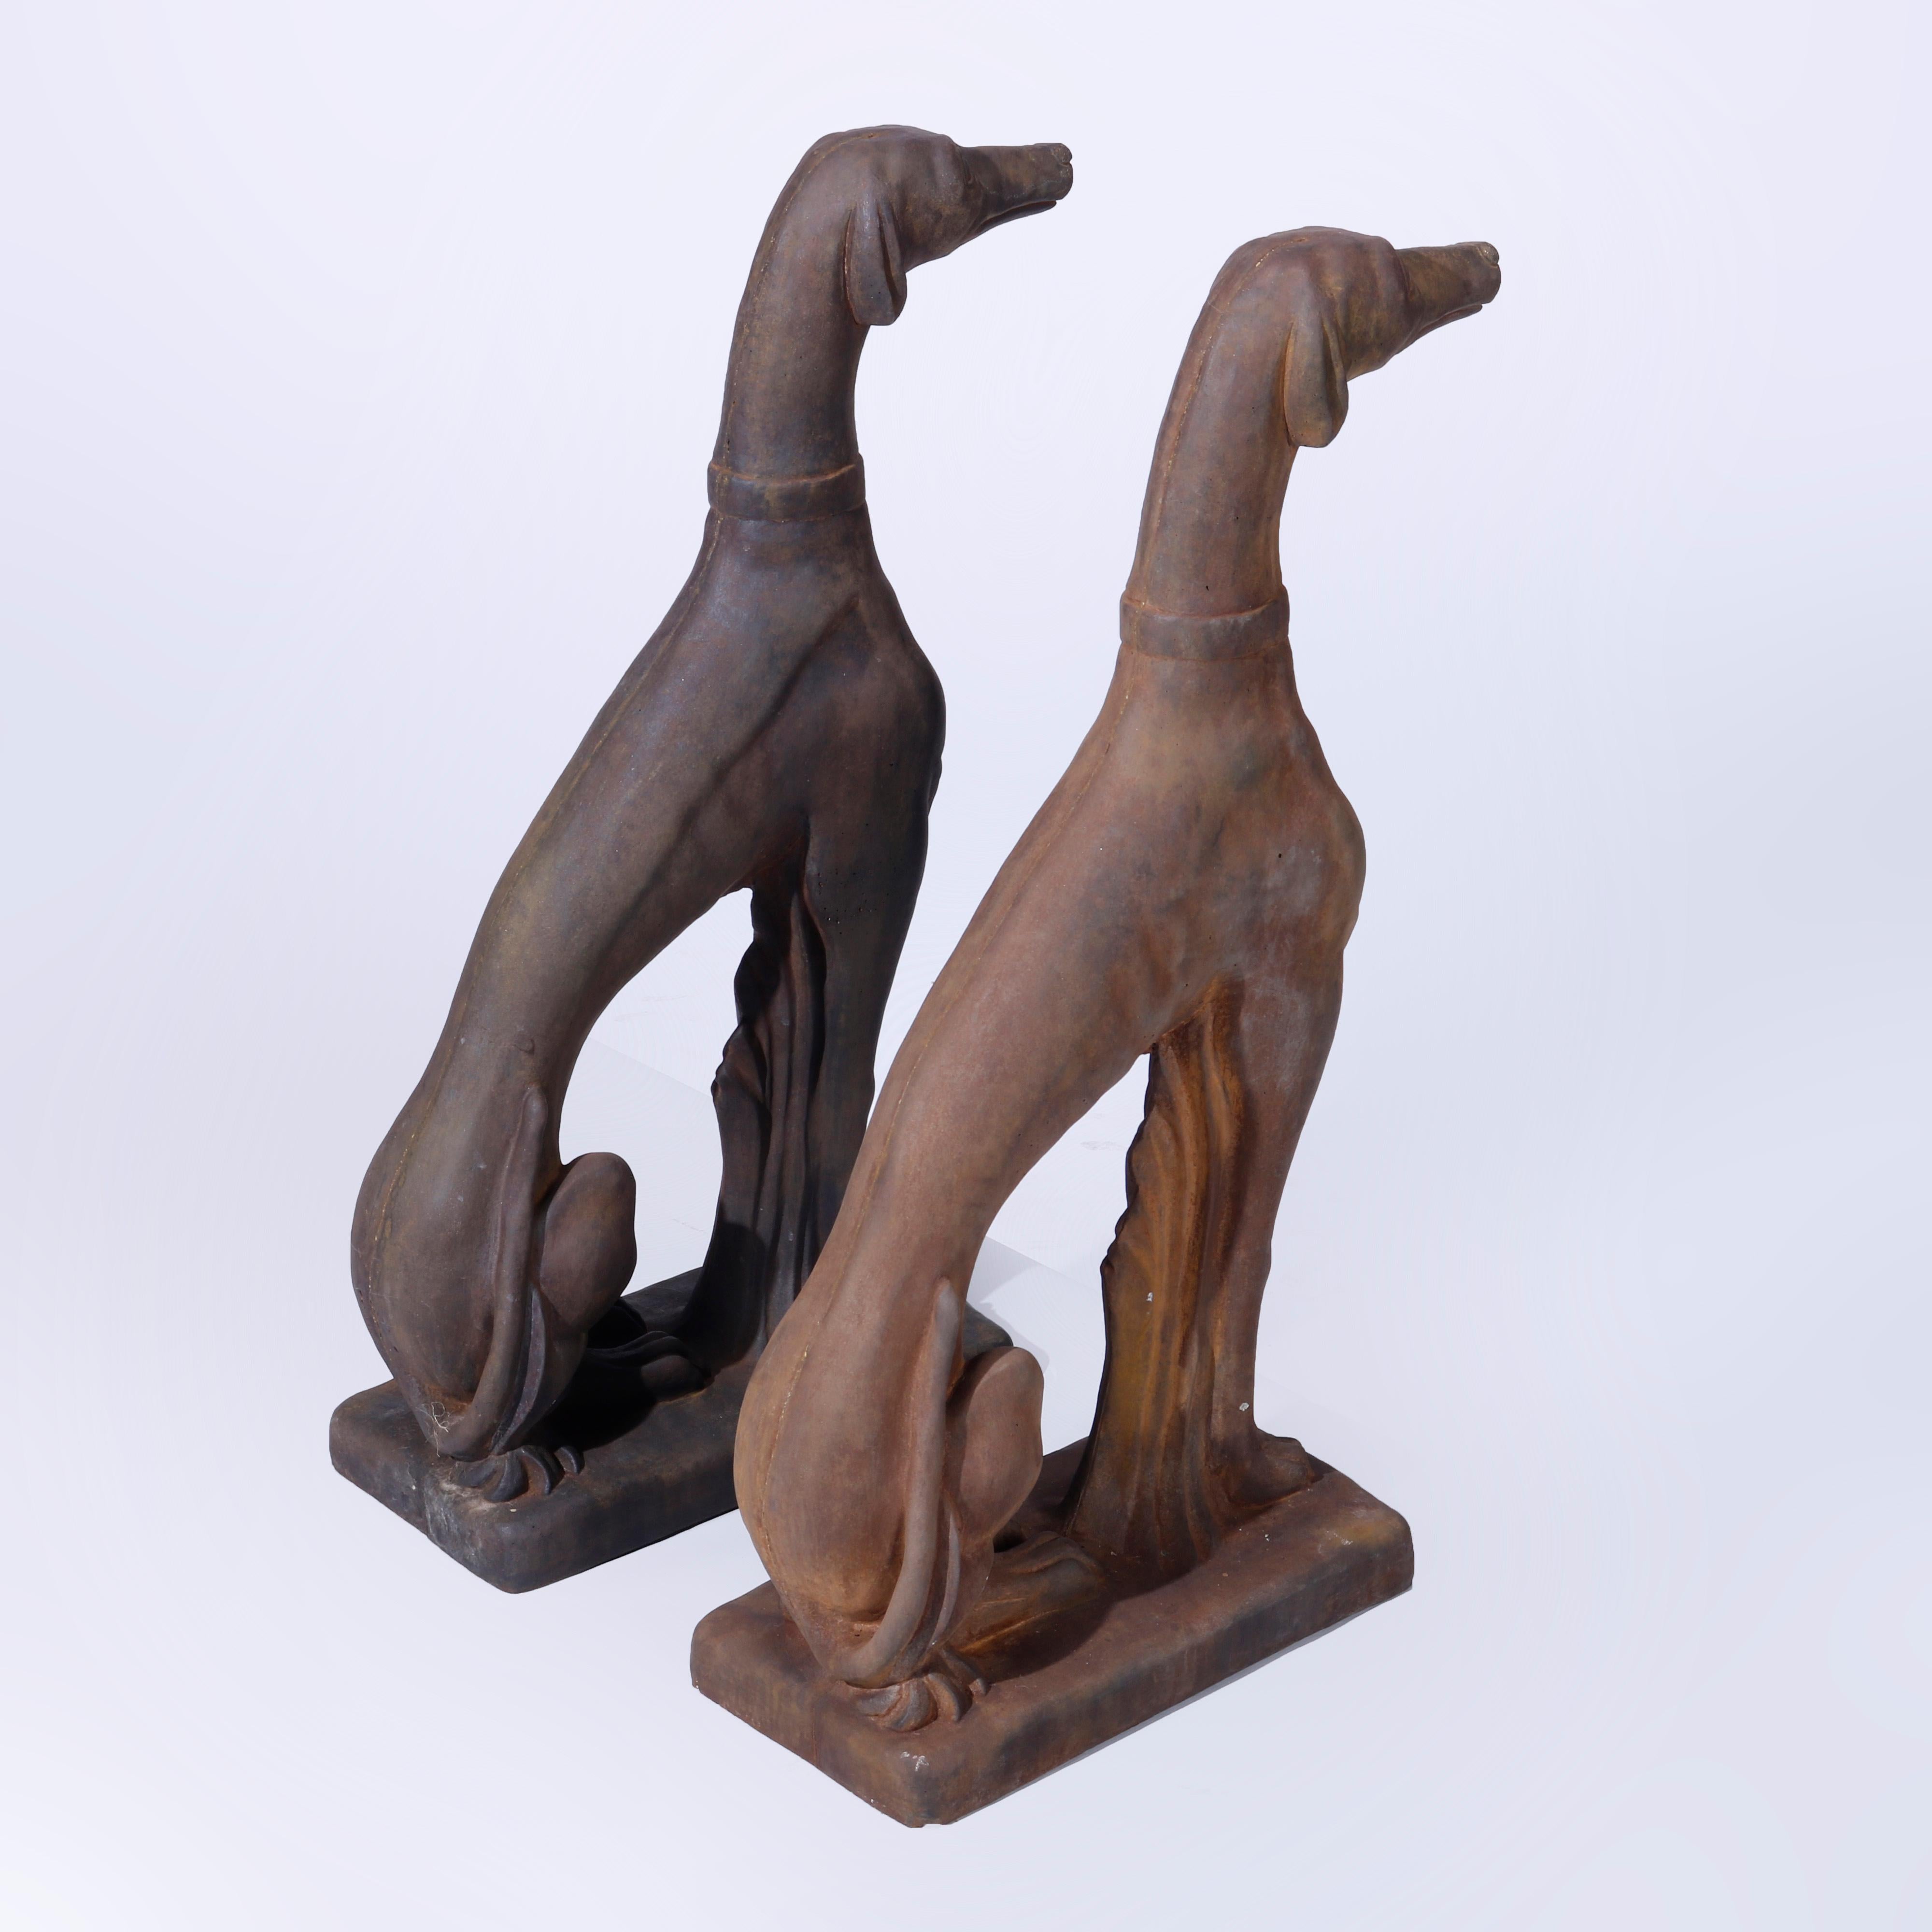 Cast Stone Life Size Cast Hard Stone Whippet Garden Statues in Bronzed Finish, 21st C